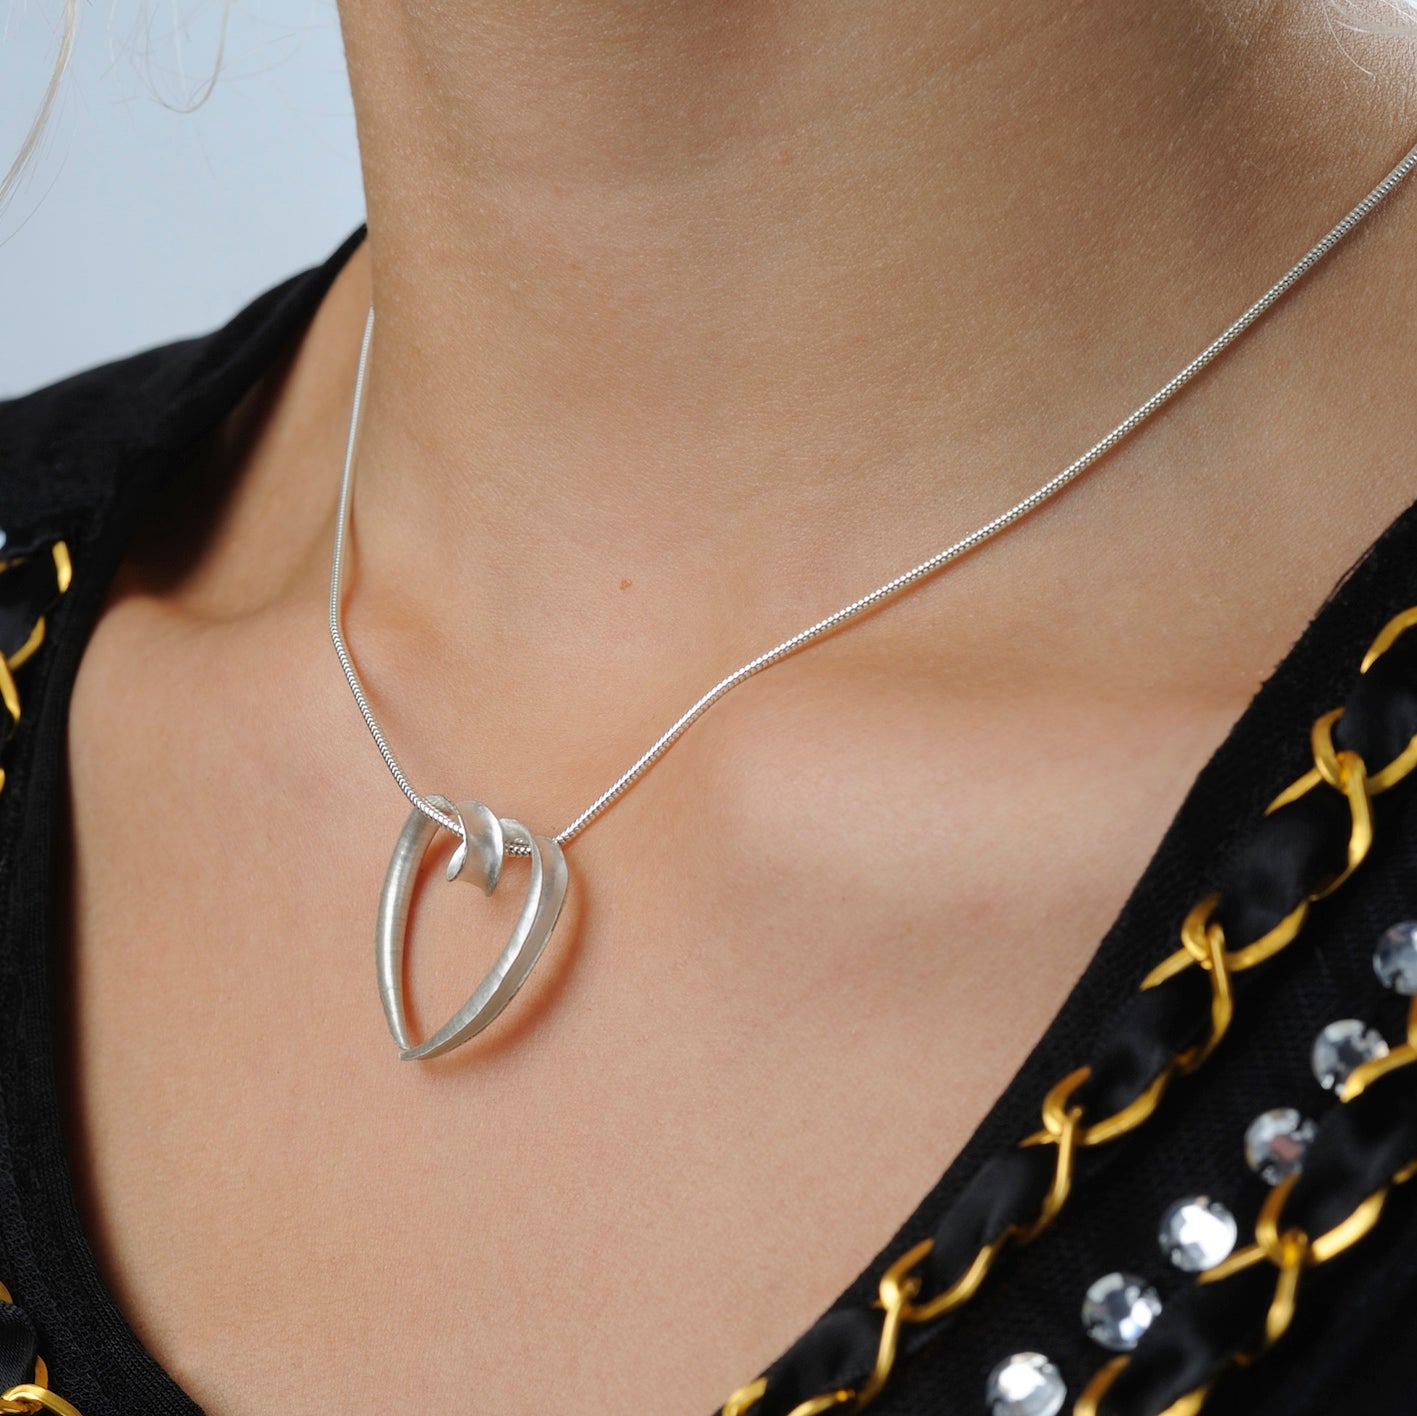 A large silver heart pendant made from a single piece of metal, formed into a sort of tube with the outer side open. It is formed into a loop at the top which the chain passes through. Shown here on a model.